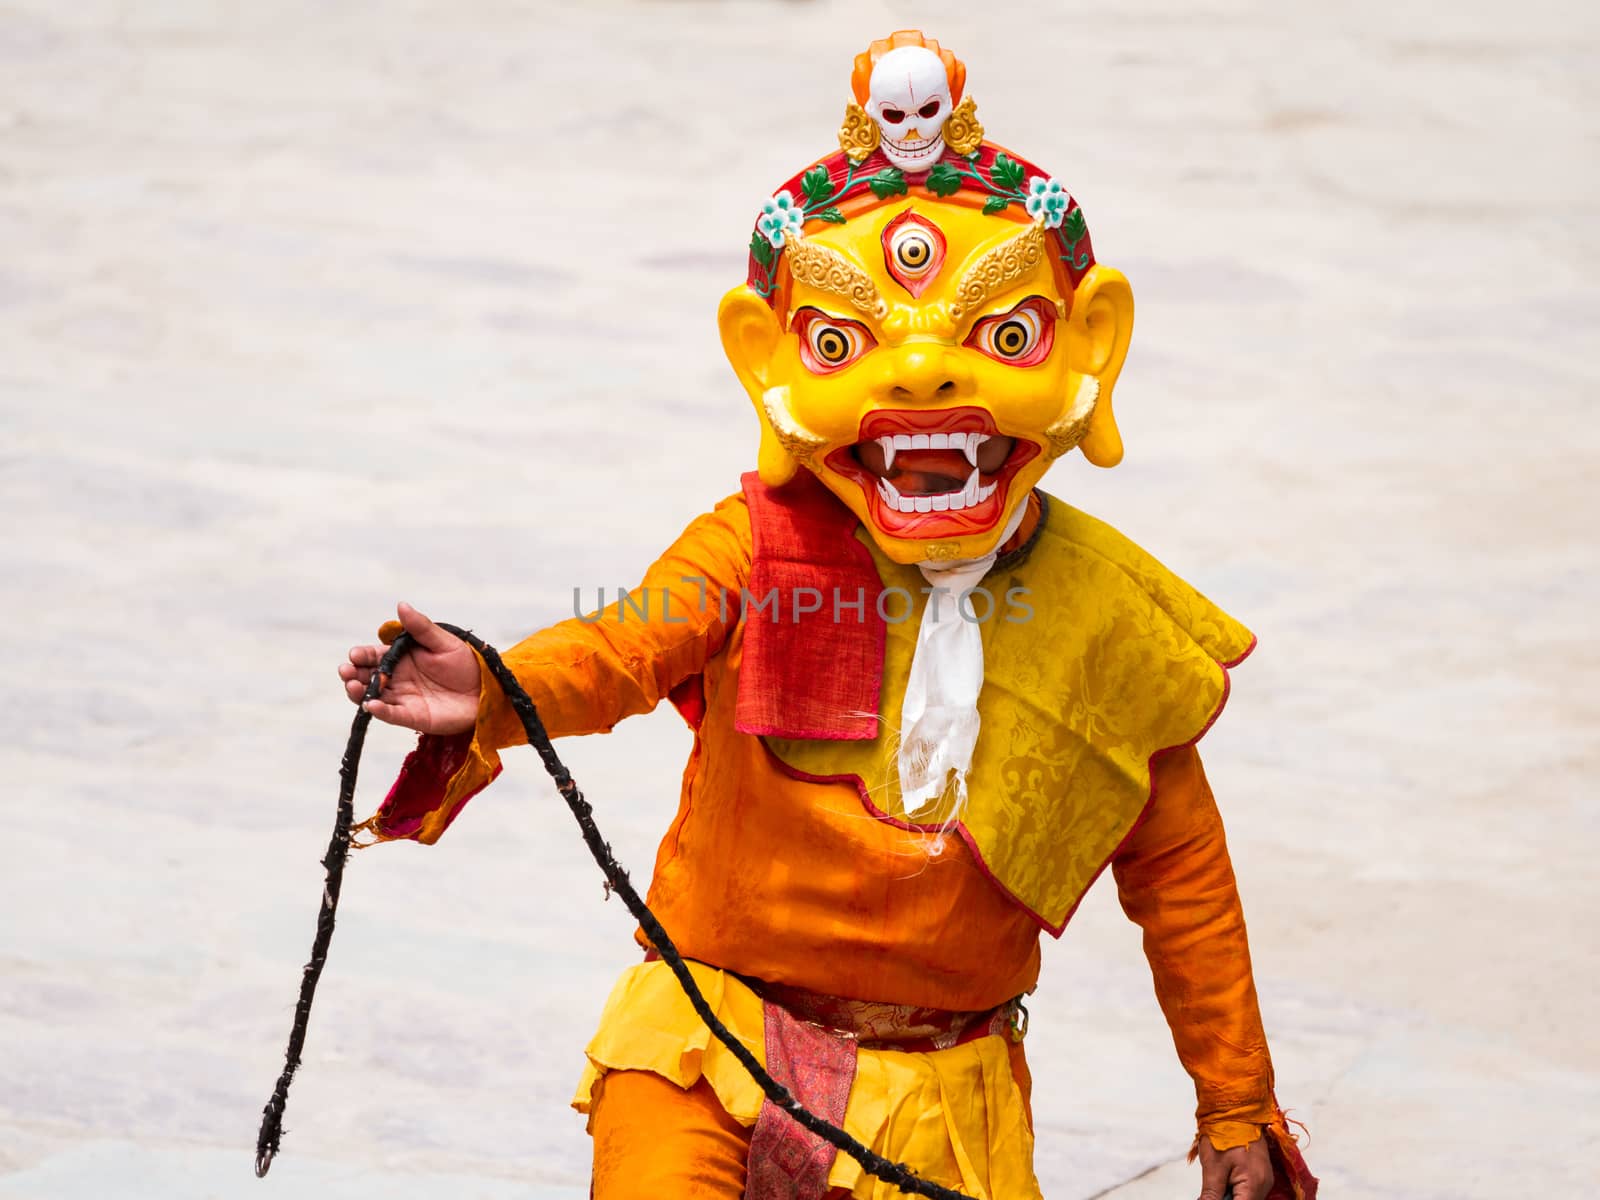 Hemis, India - June 29, 2012: unidentified monk performs a religious masked and costumed mystery dance of Tibetan Buddhism during the Cham Dance Festival in Hemis monastery, India.